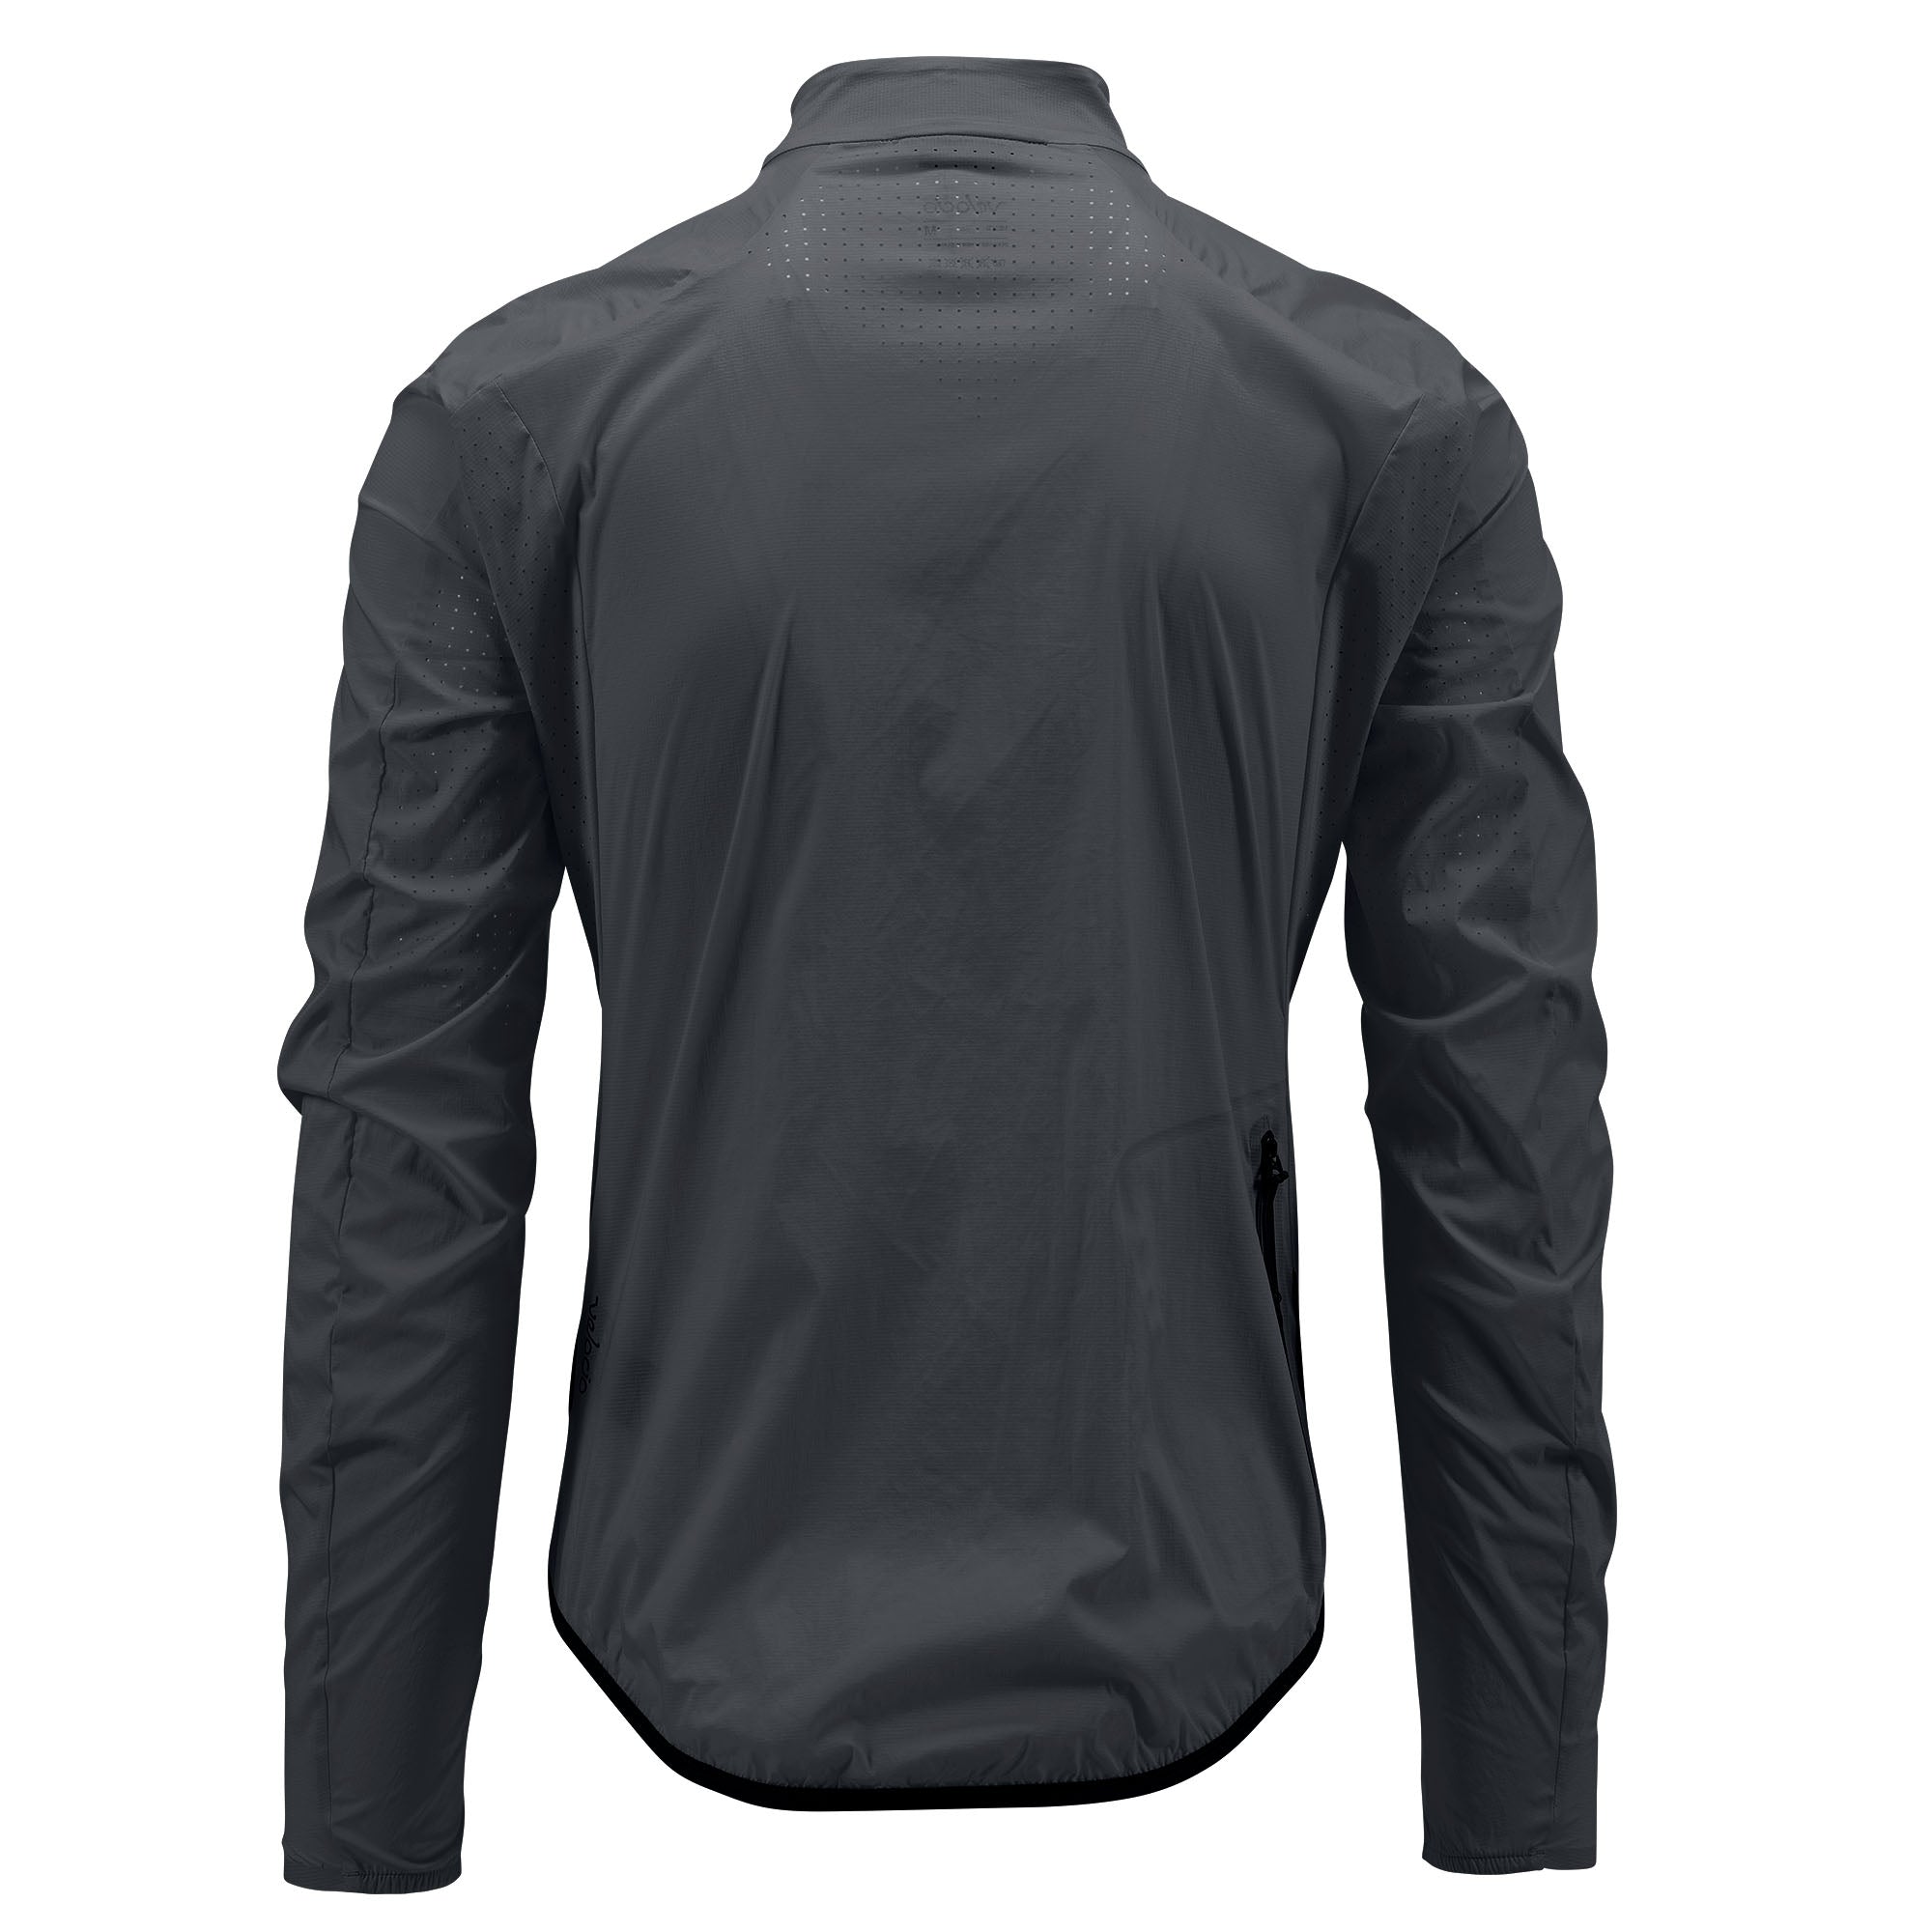 Jacket Shirt in Pune at best price by Just T Shirt - Justdial